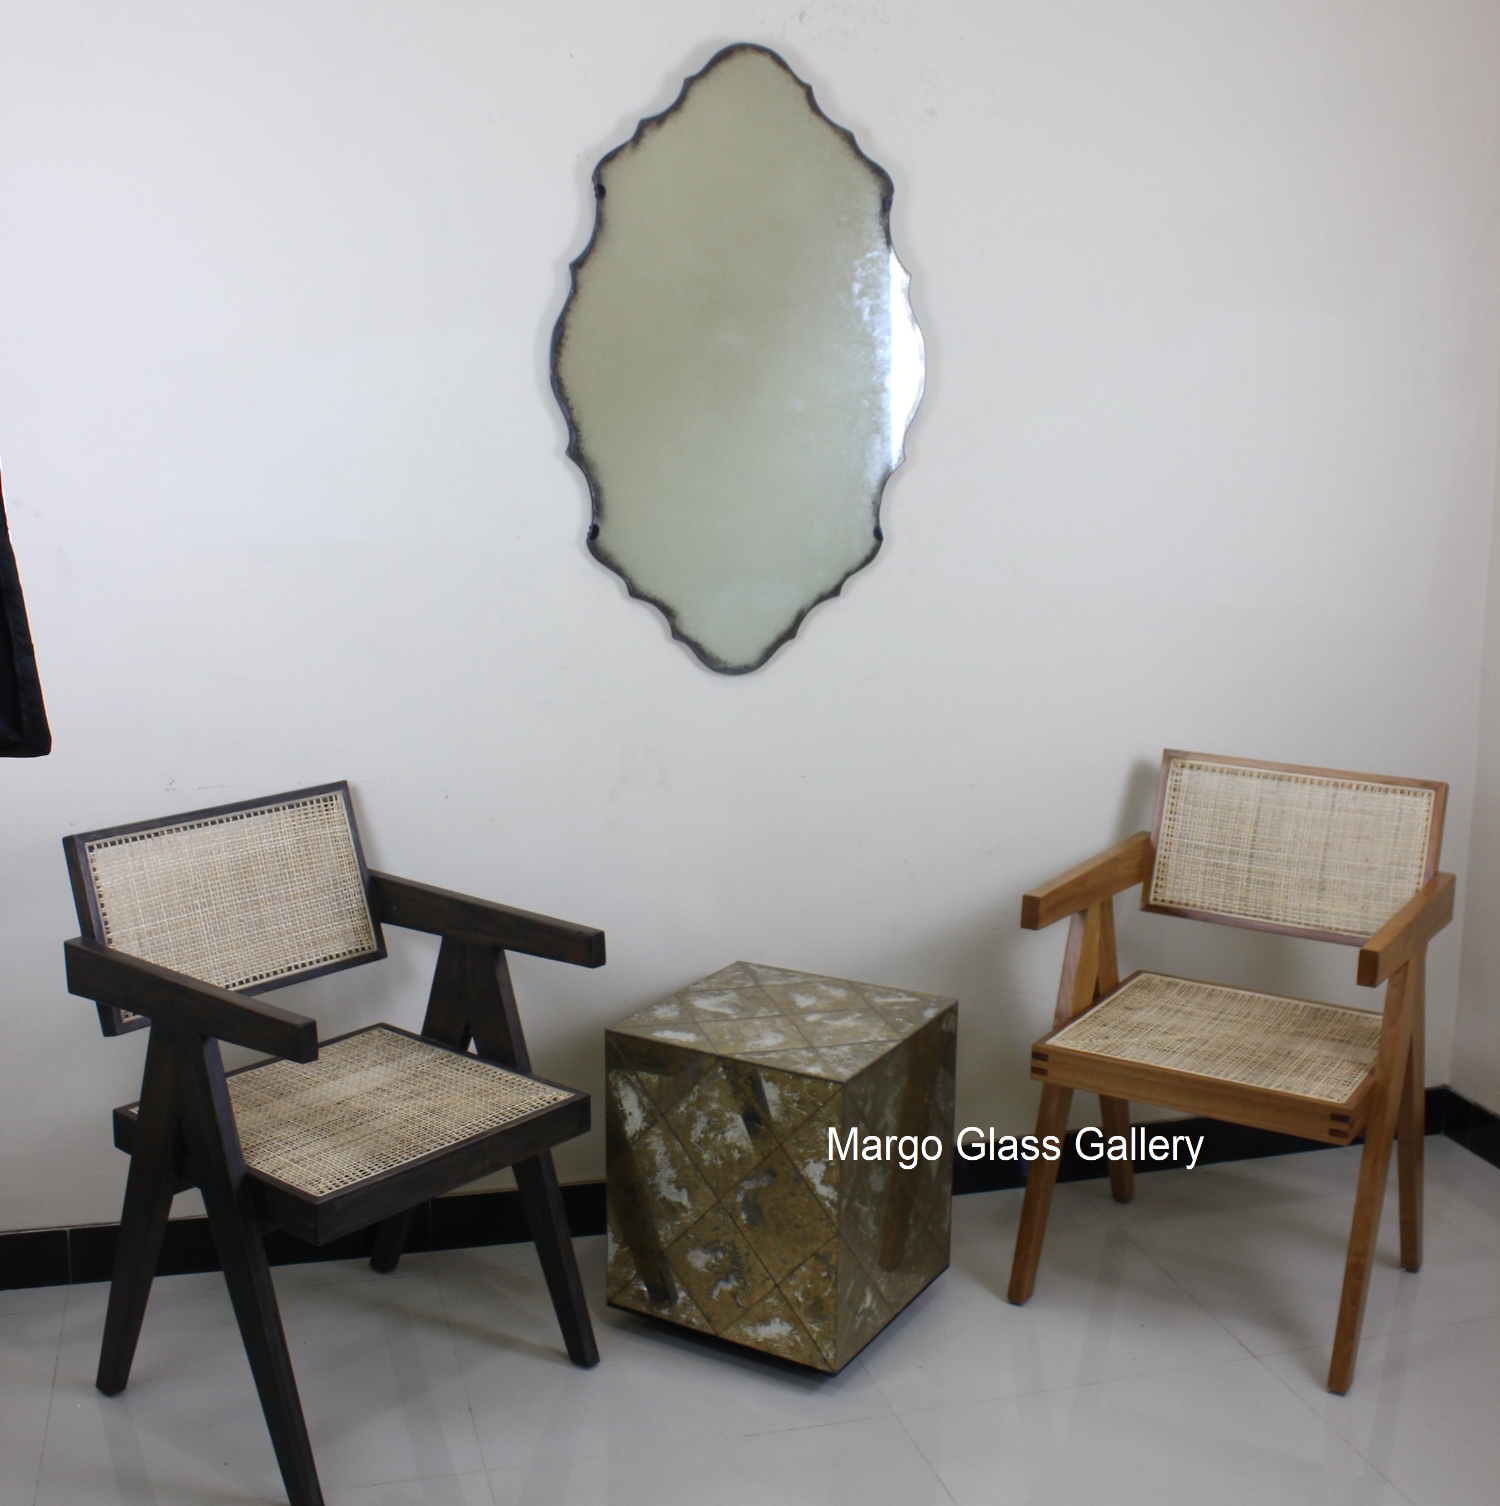 Antique Mirror: A Way to Infuse Uniqueness into Your House